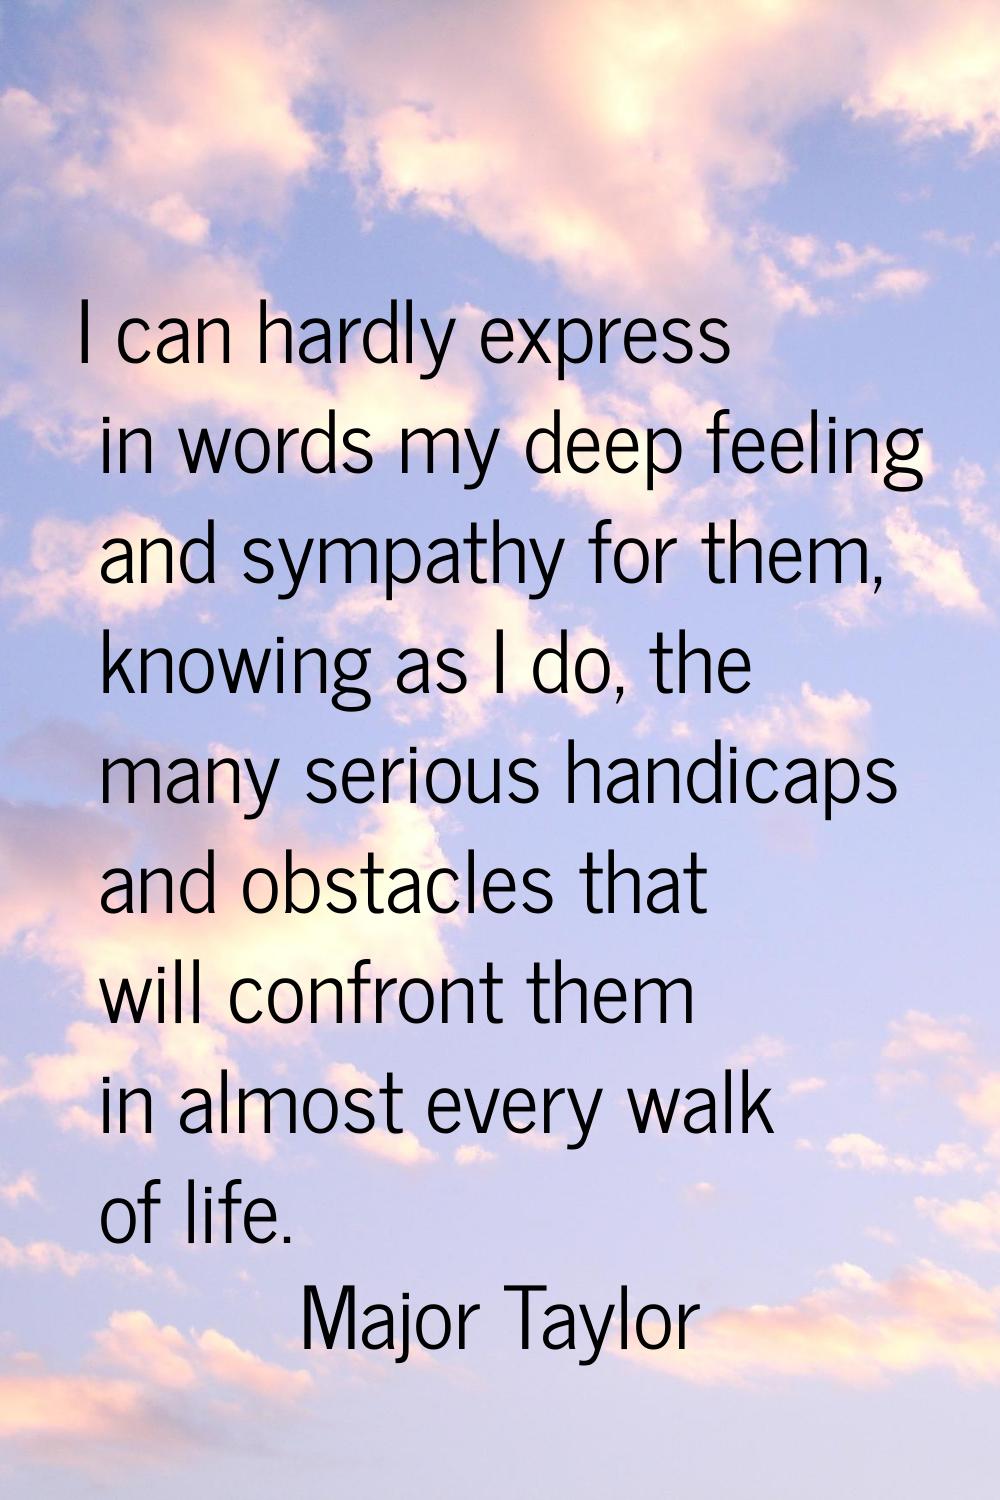 I can hardly express in words my deep feeling and sympathy for them, knowing as I do, the many seri